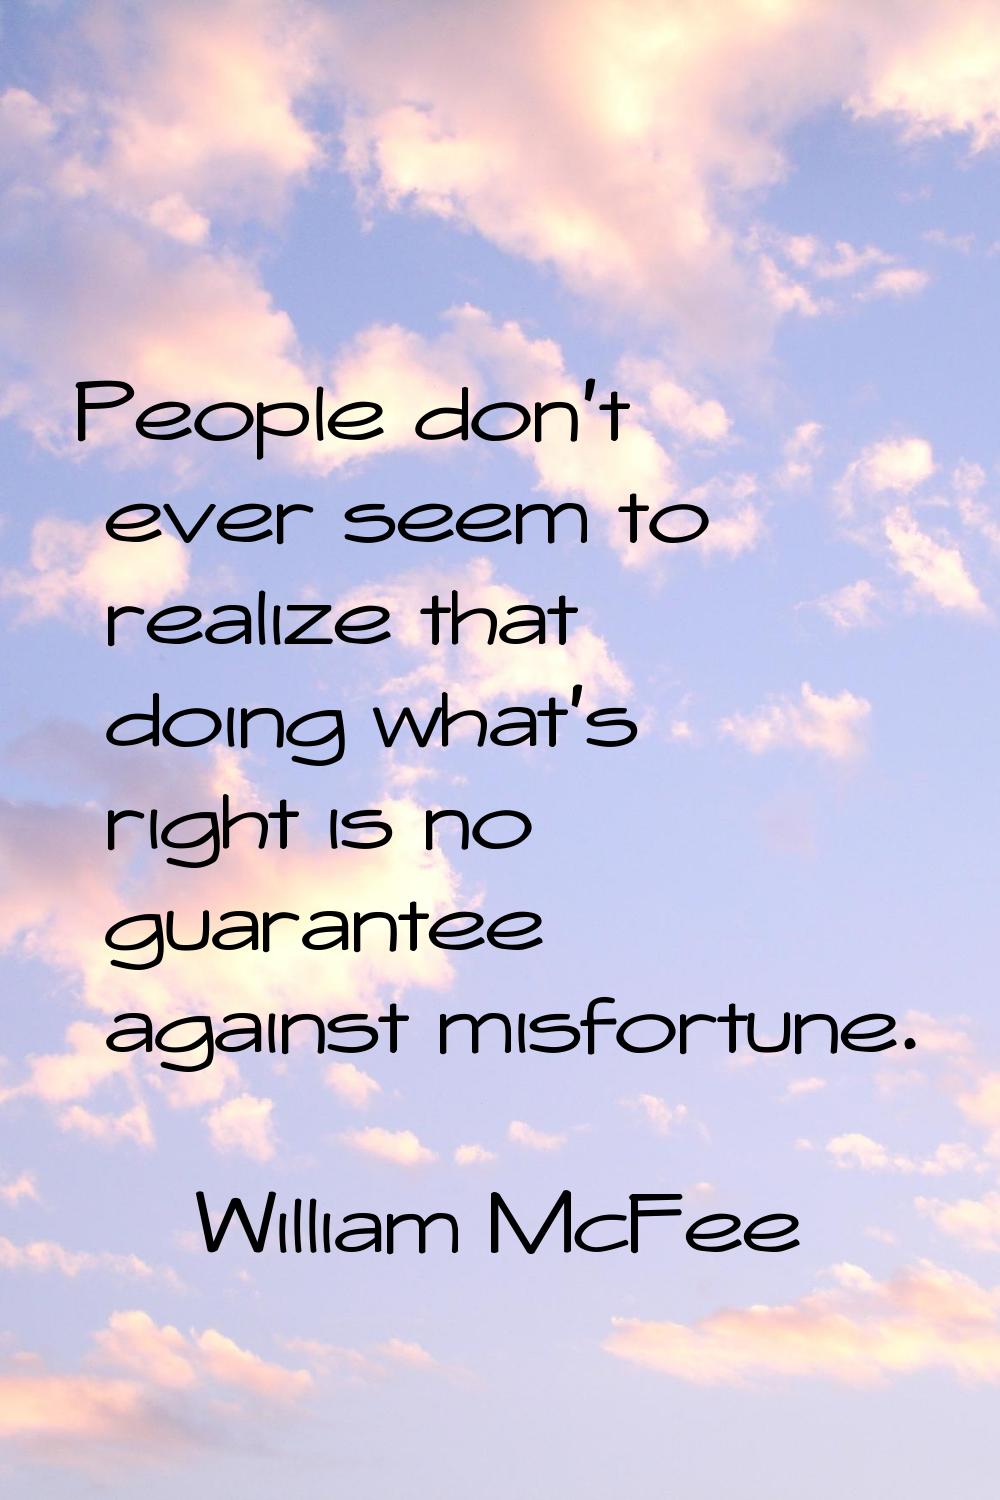 People don't ever seem to realize that doing what's right is no guarantee against misfortune.